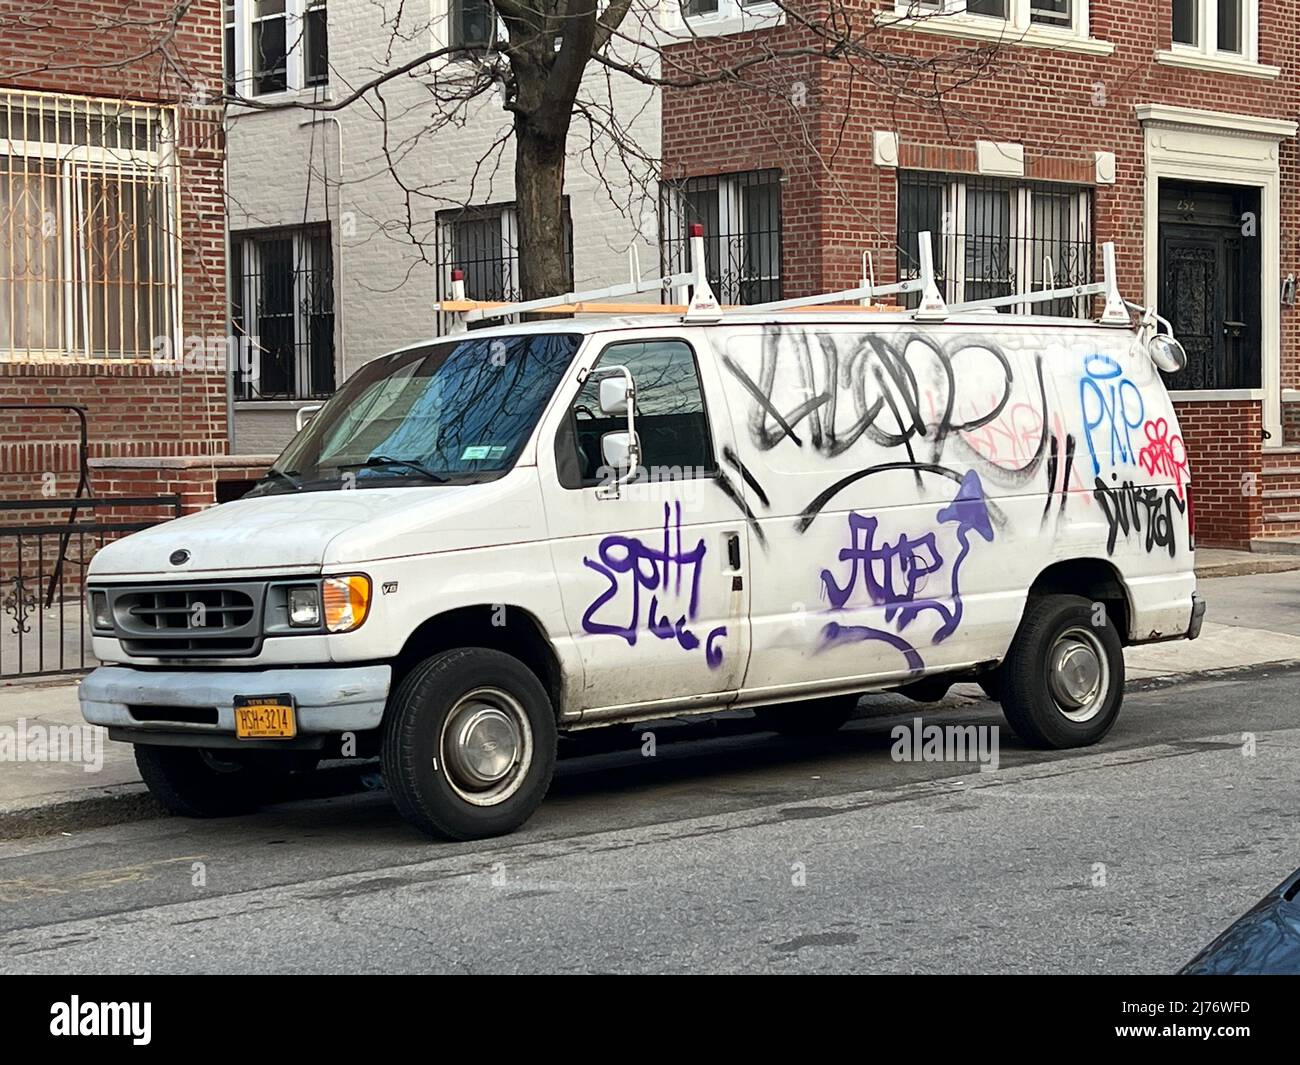 Vans are easy pickings for graffiti type tagging in urban neighborhoods  like this example in Central Brooklyn, New York City Stock Photo - Alamy